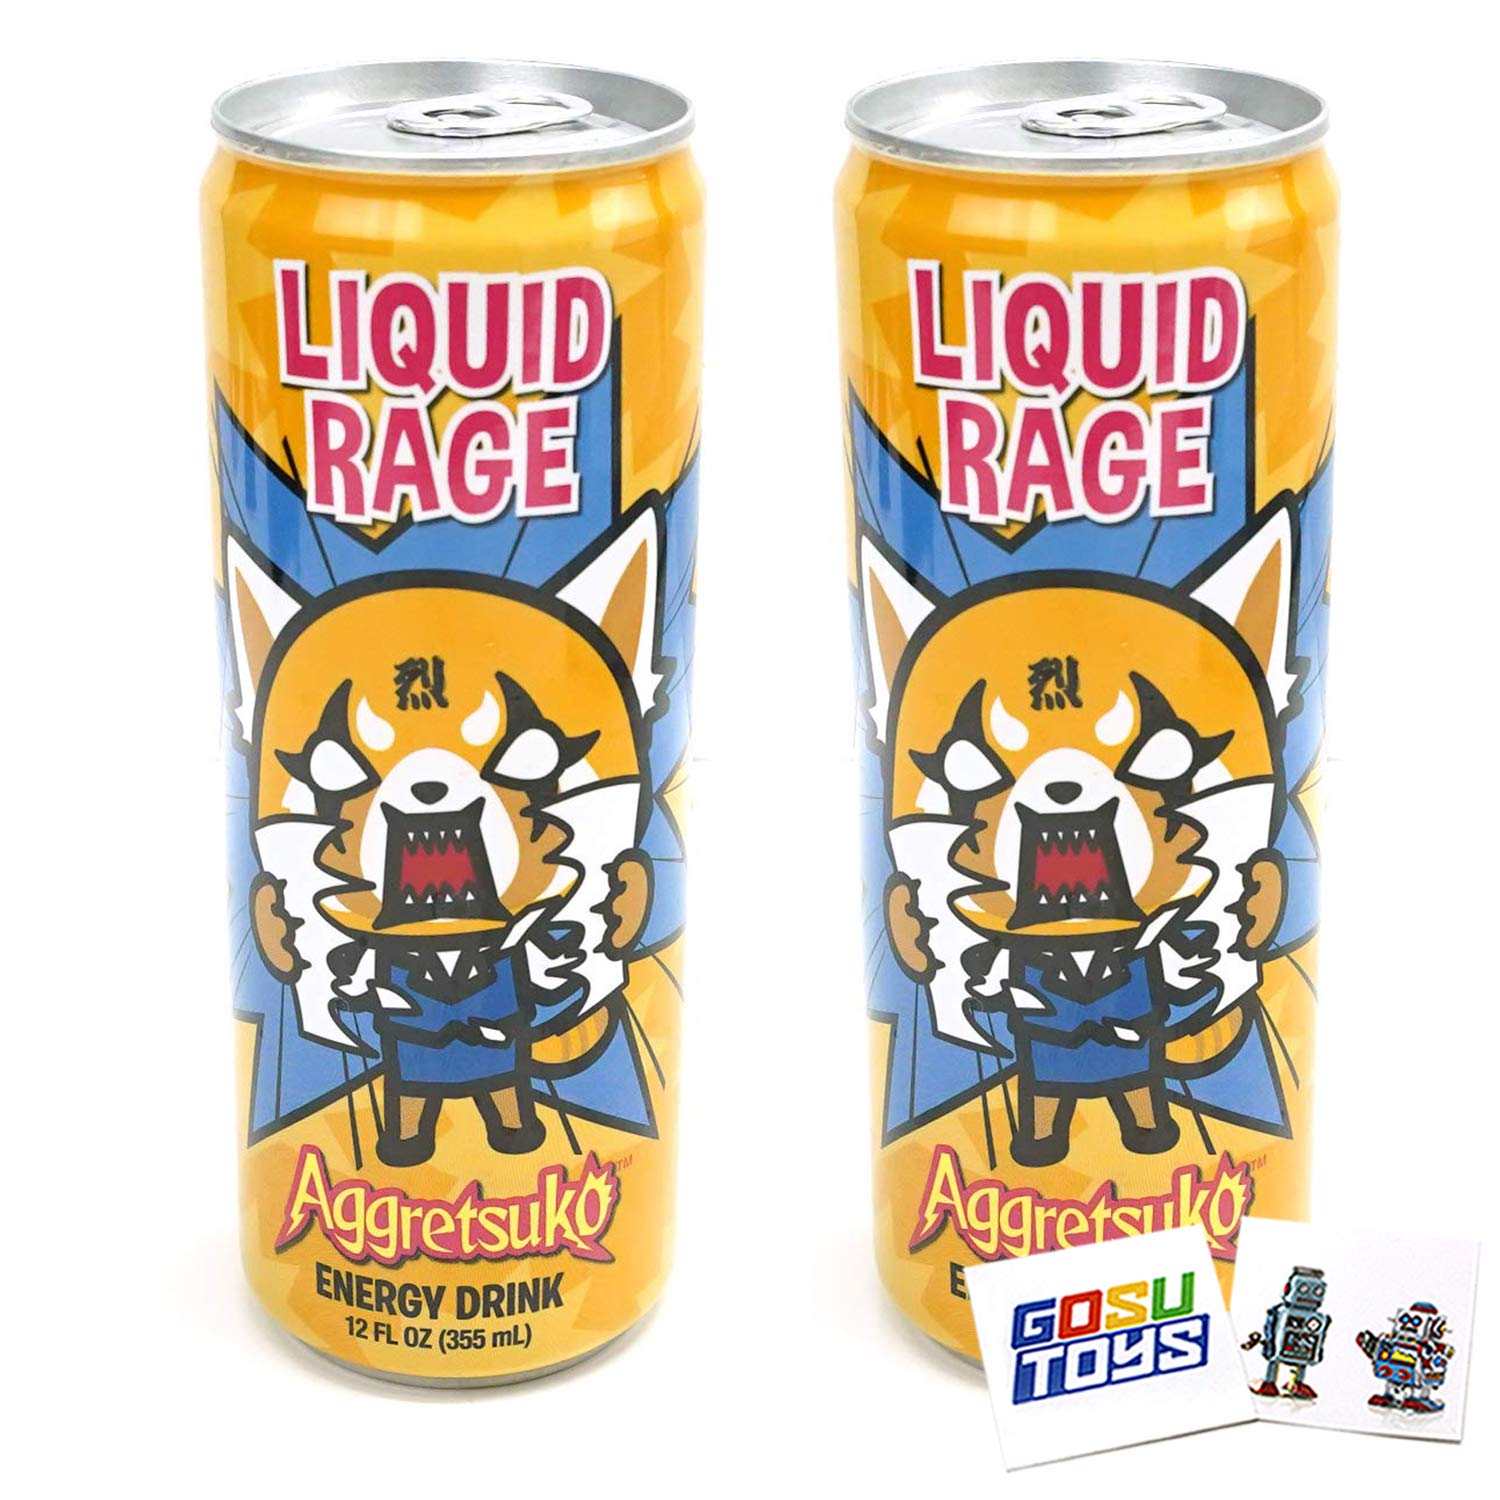 Aggretsuko Liquid Rage Energy Drink 12 FL OZ (355mL) Can (2 Pack) With 2 GosuToys Stickers